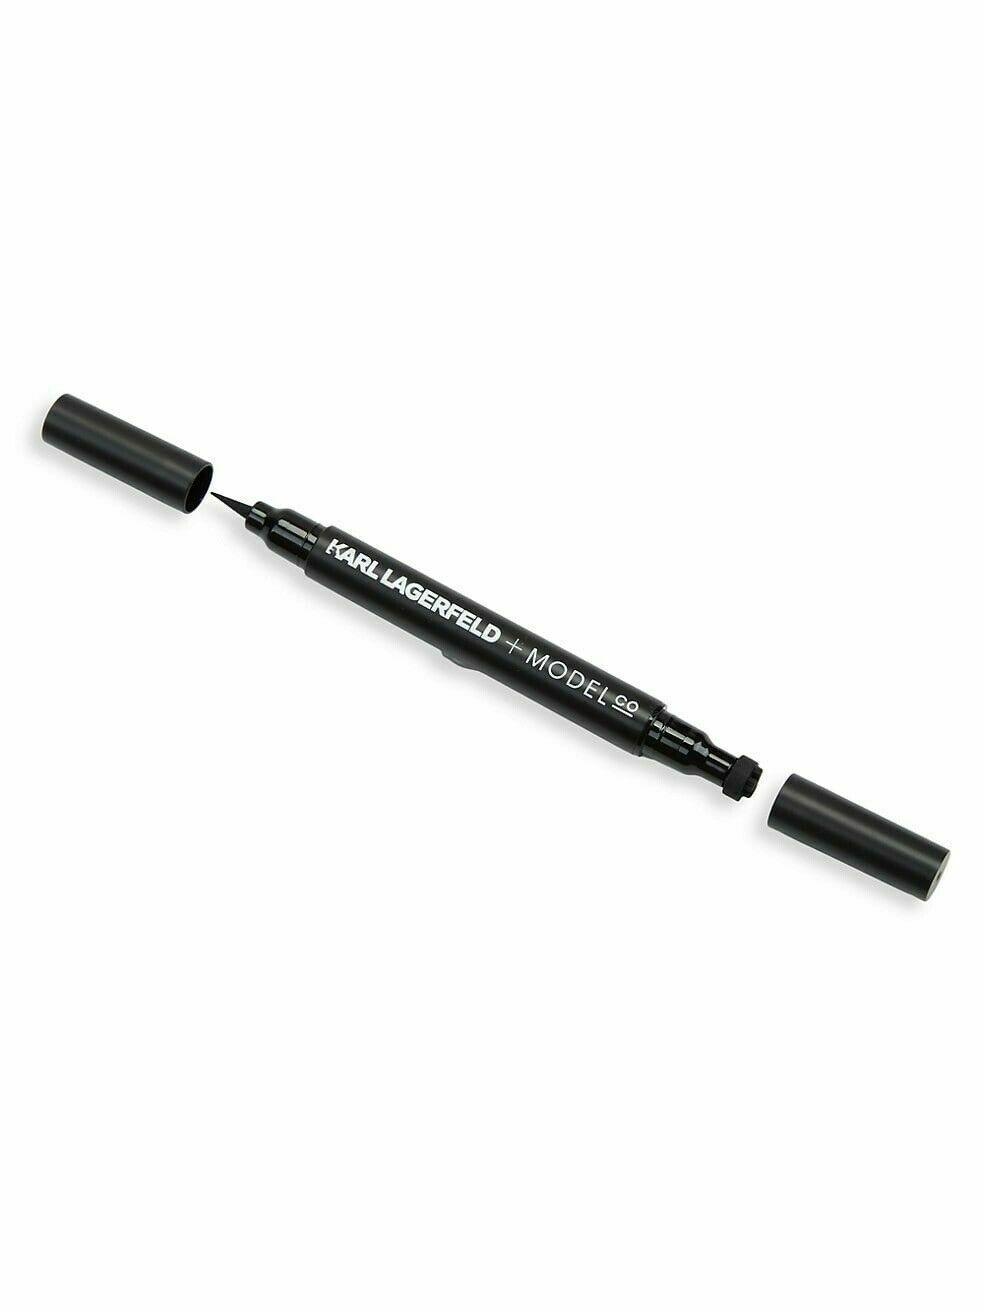 KARL LAGERFELD + MODELCO Black Long Lasting Liquid Liner with Kameo Stamp - SVNYFancy